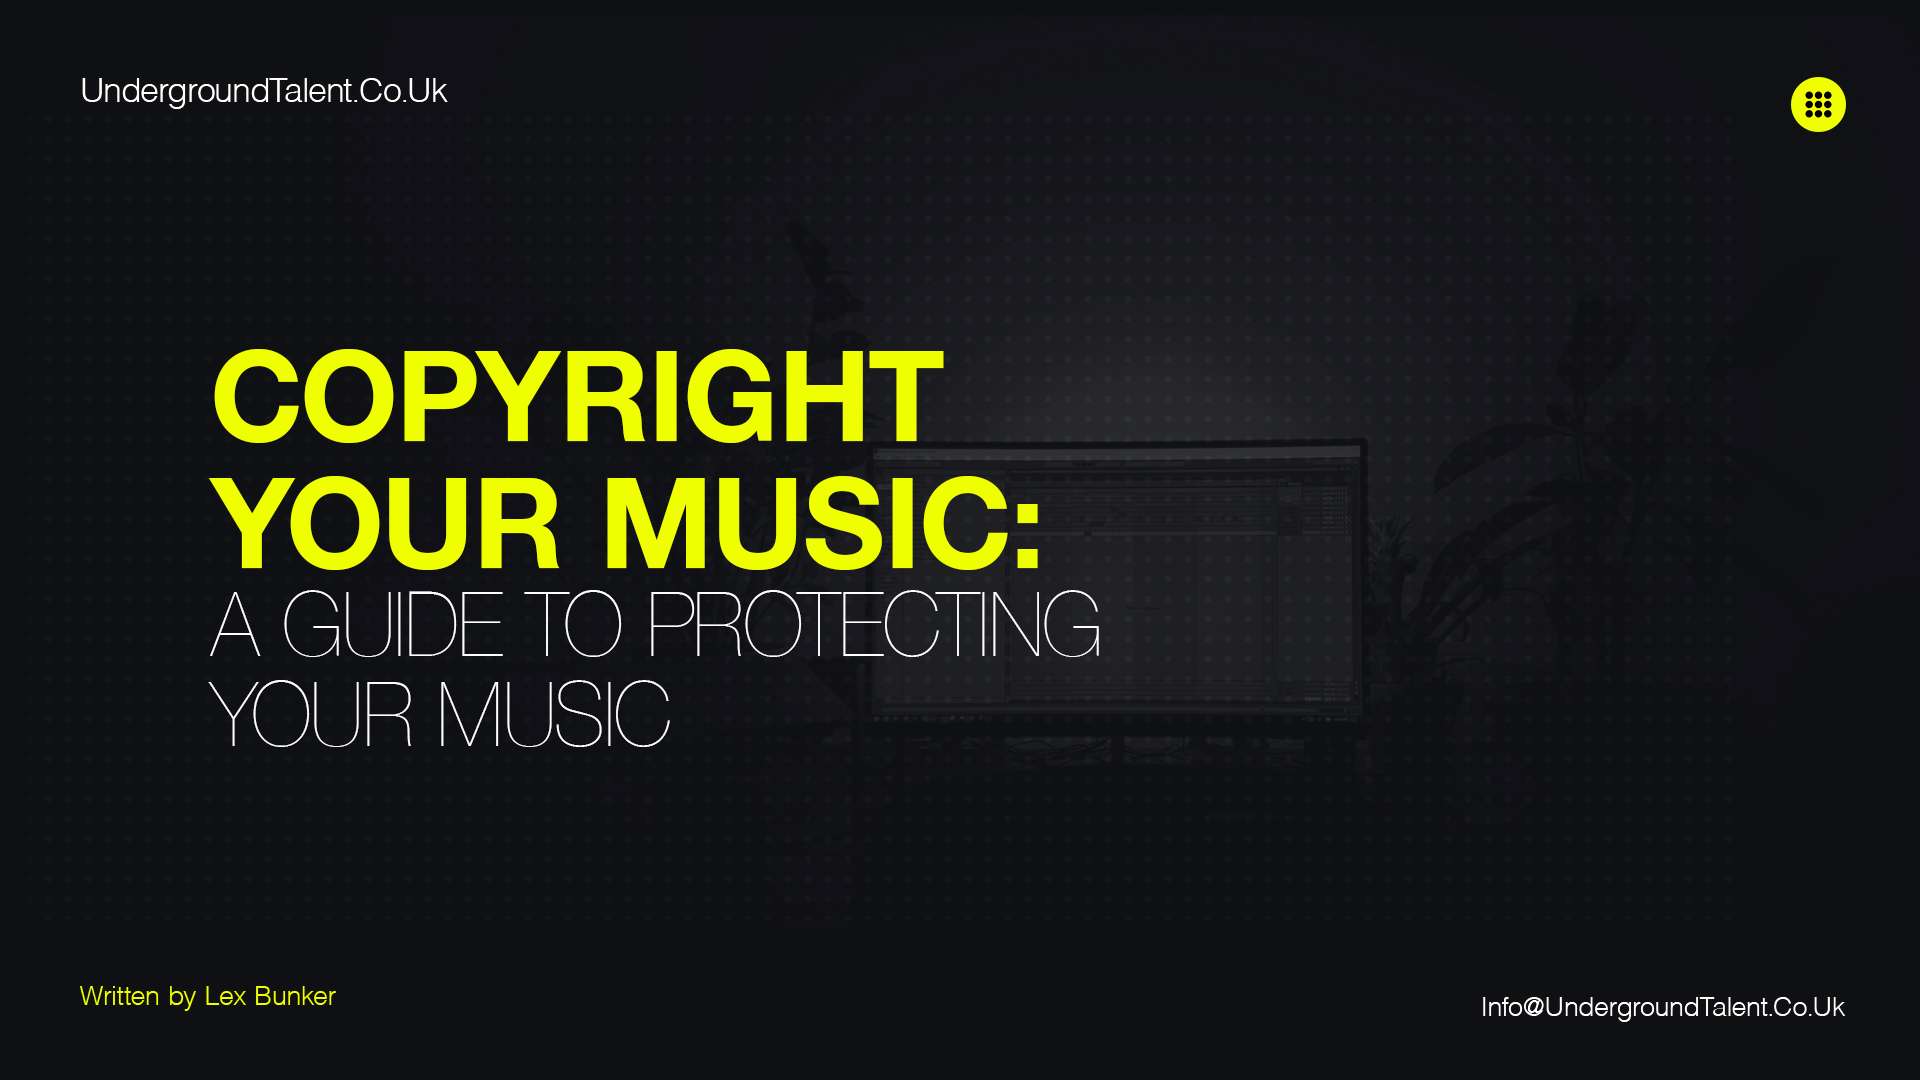 How to Copyright Your Music: A Guide to Protecting Your Music